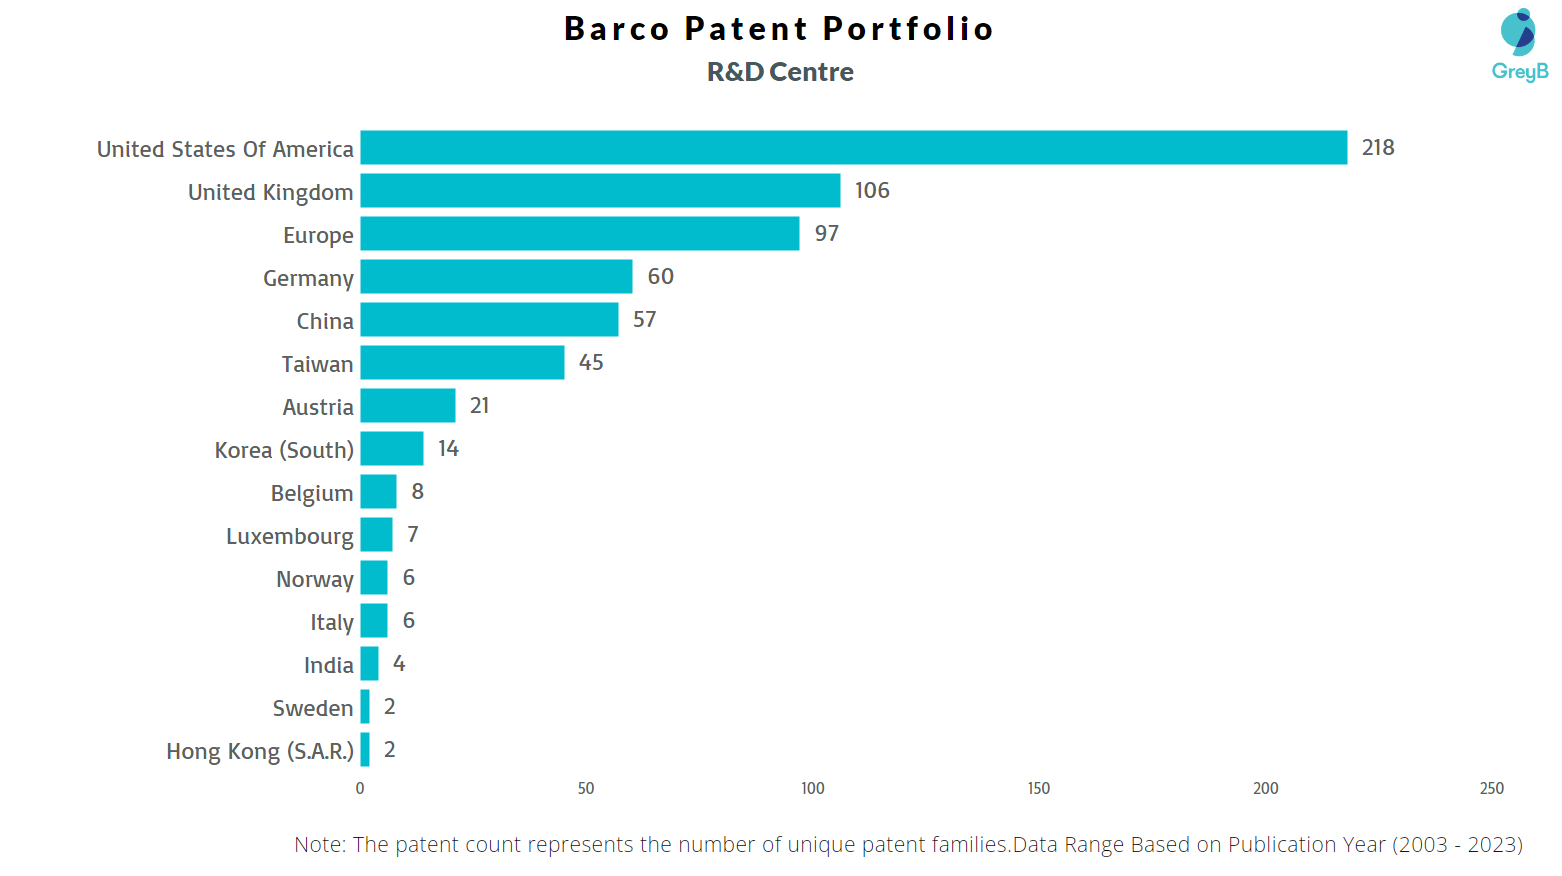 Research Centers of Barco Patents